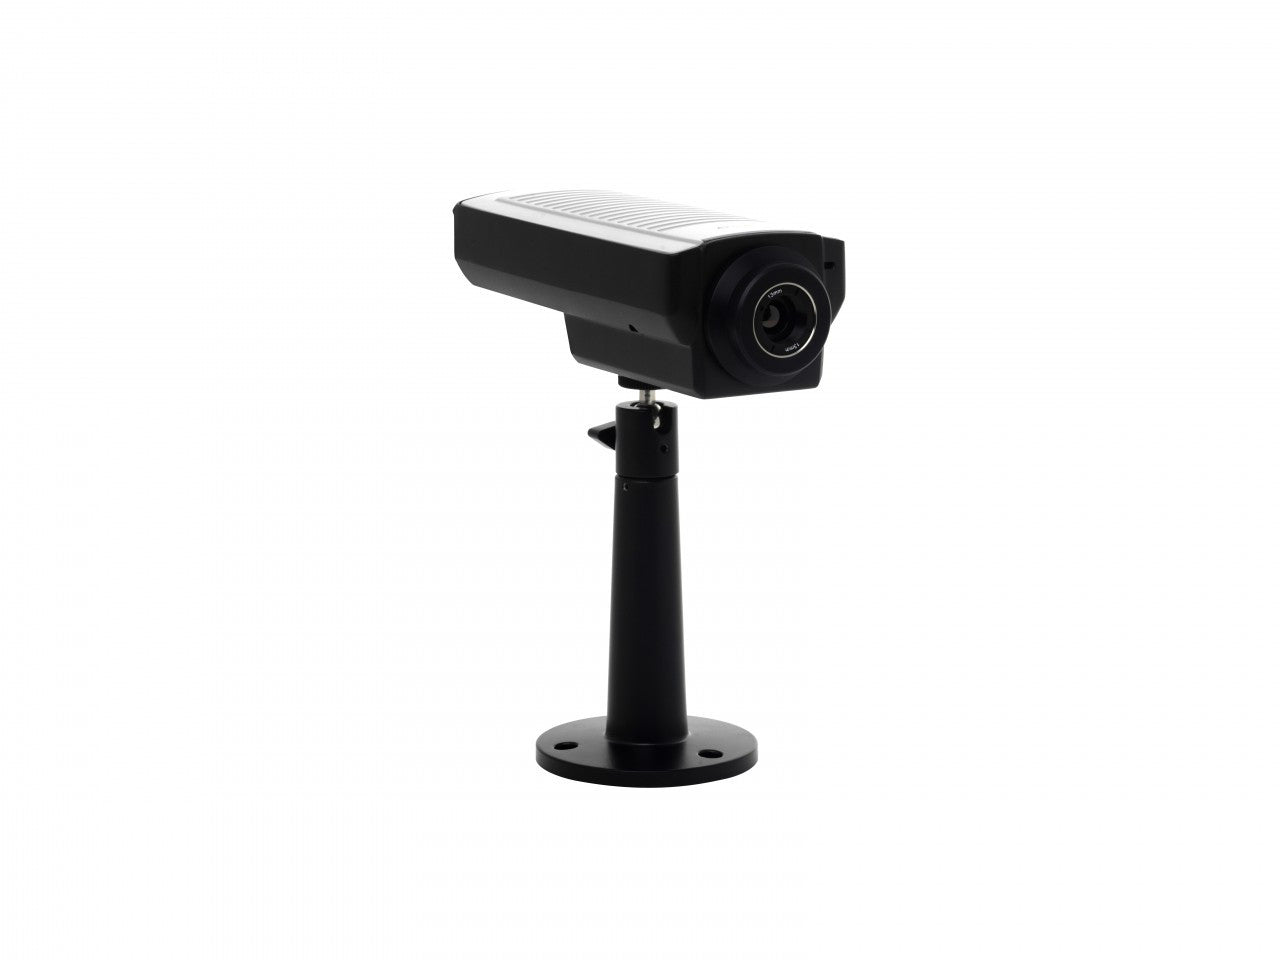 AXIS Q1921 (0384-001) Thermal Network Camera